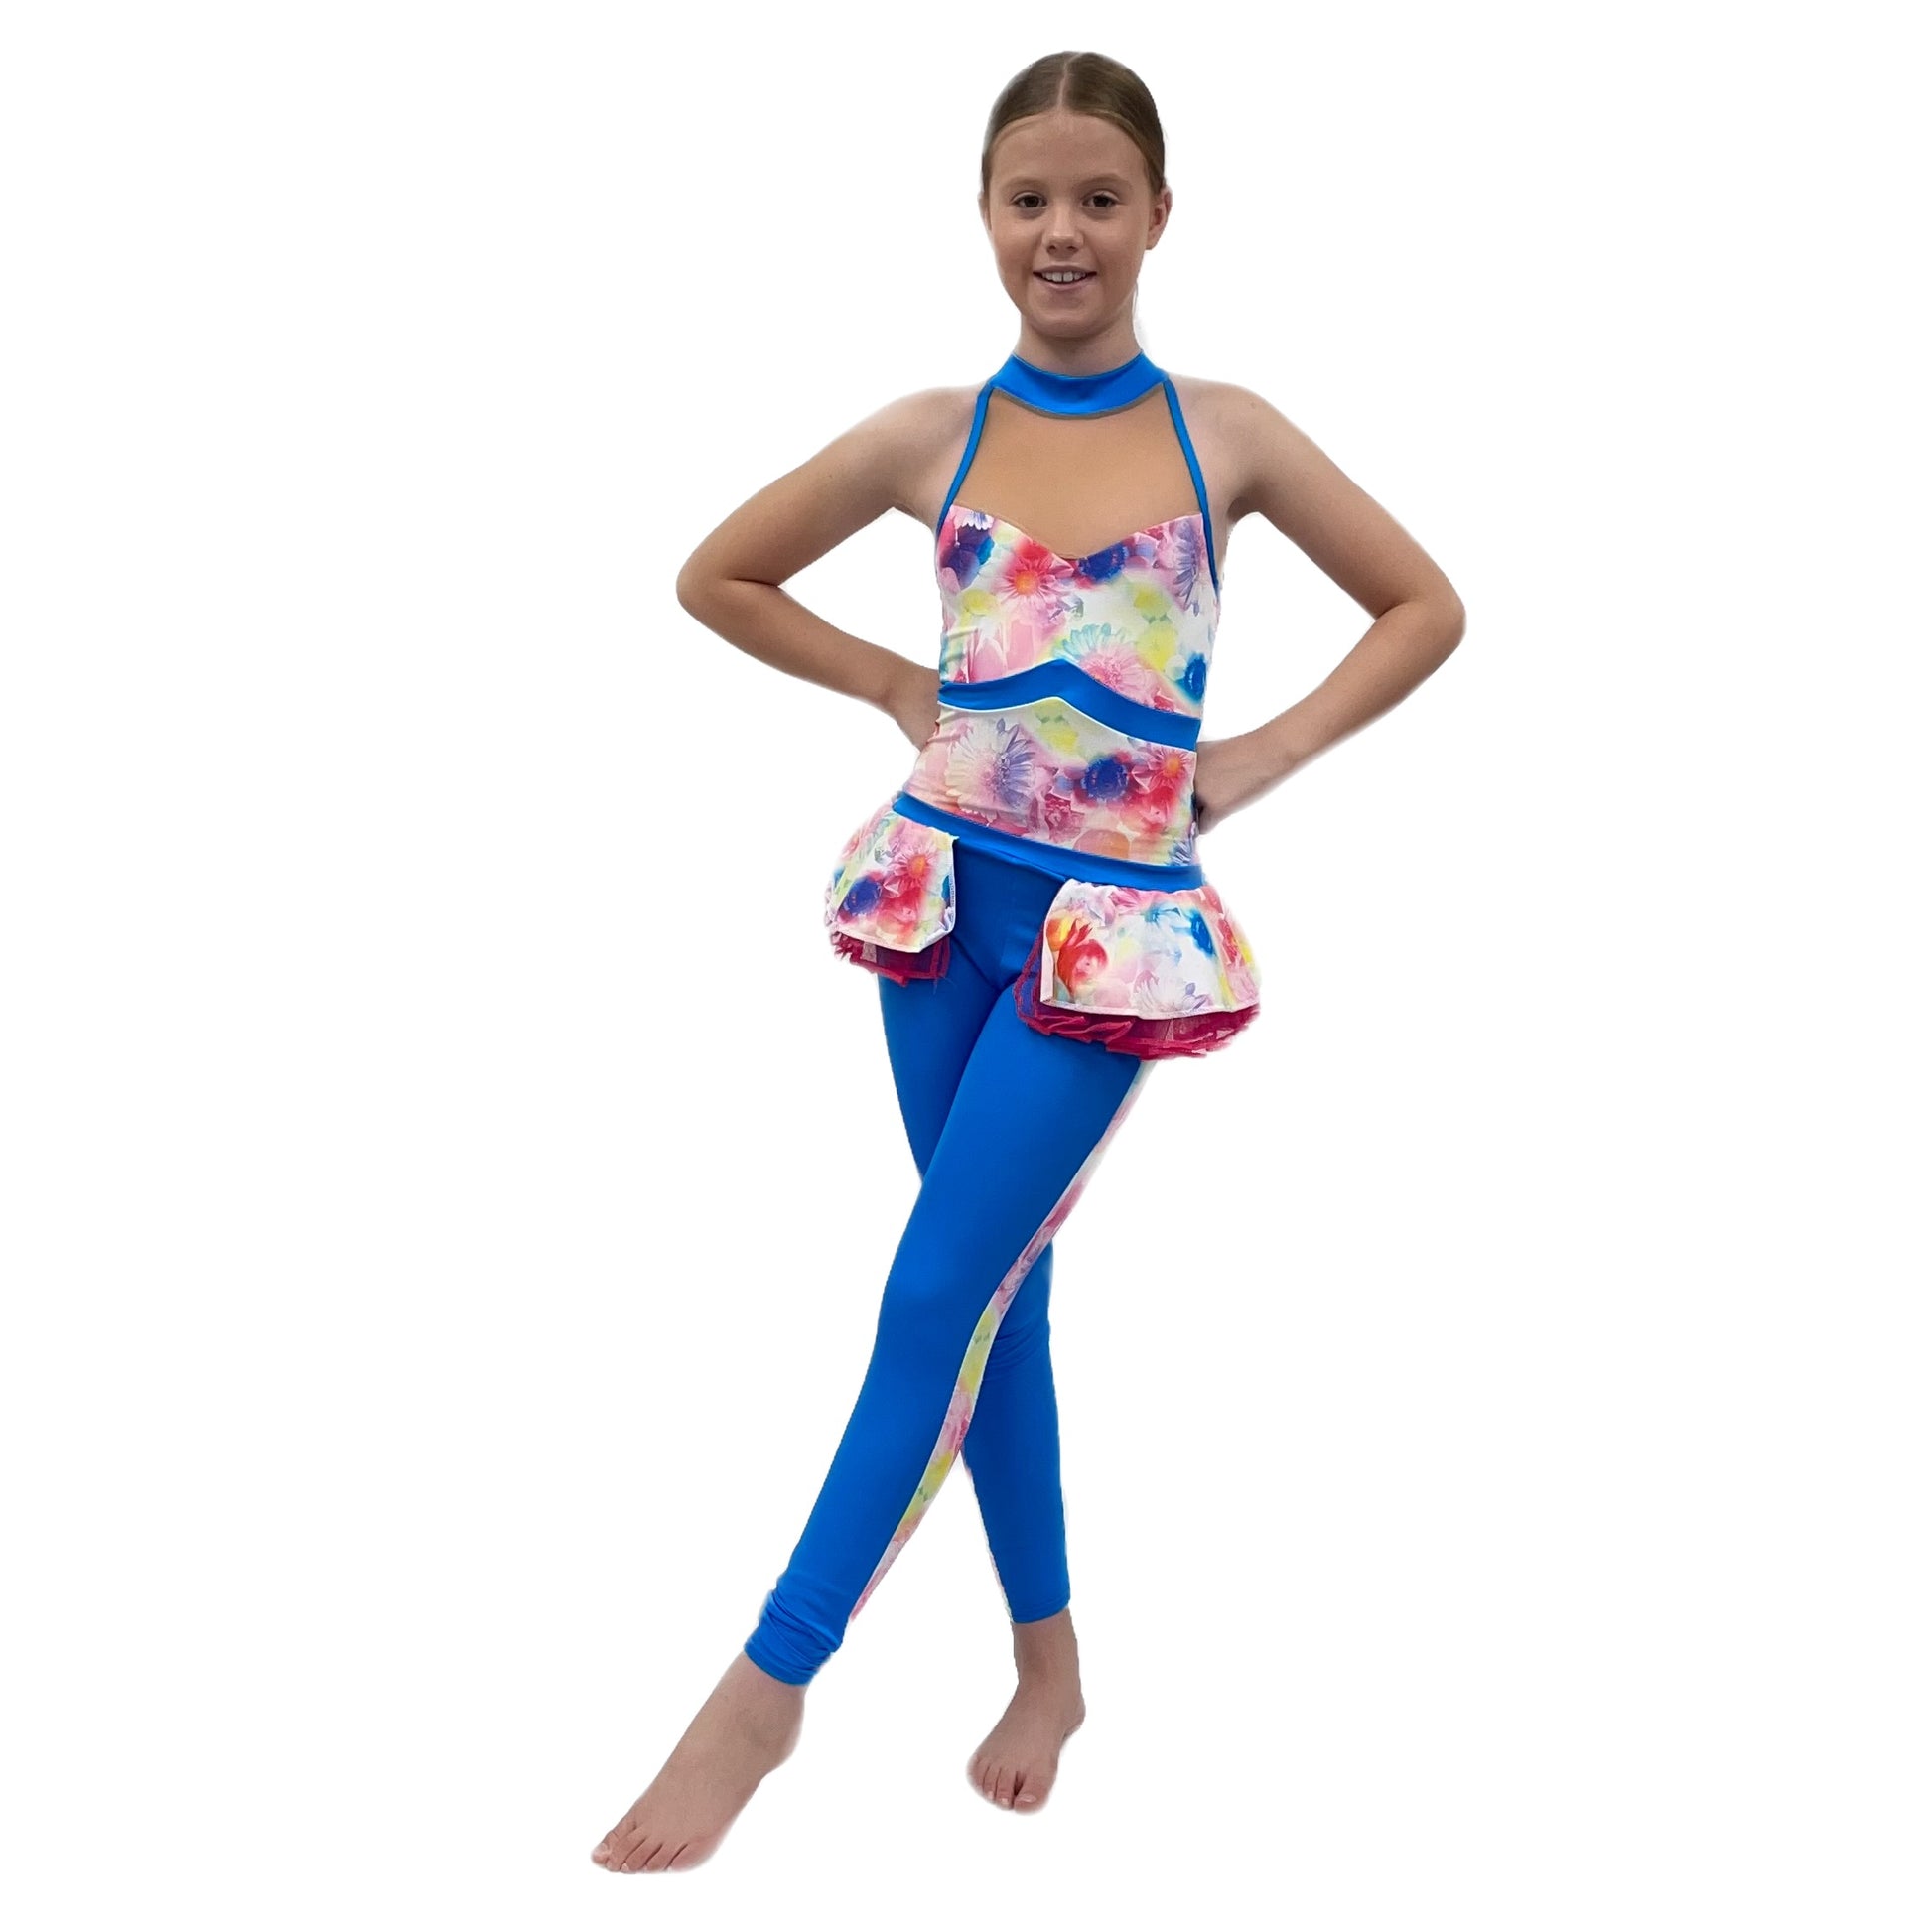 Blue/Multi Catsuit with Attached Skirt | Razzle Dazzle Dance Costumes